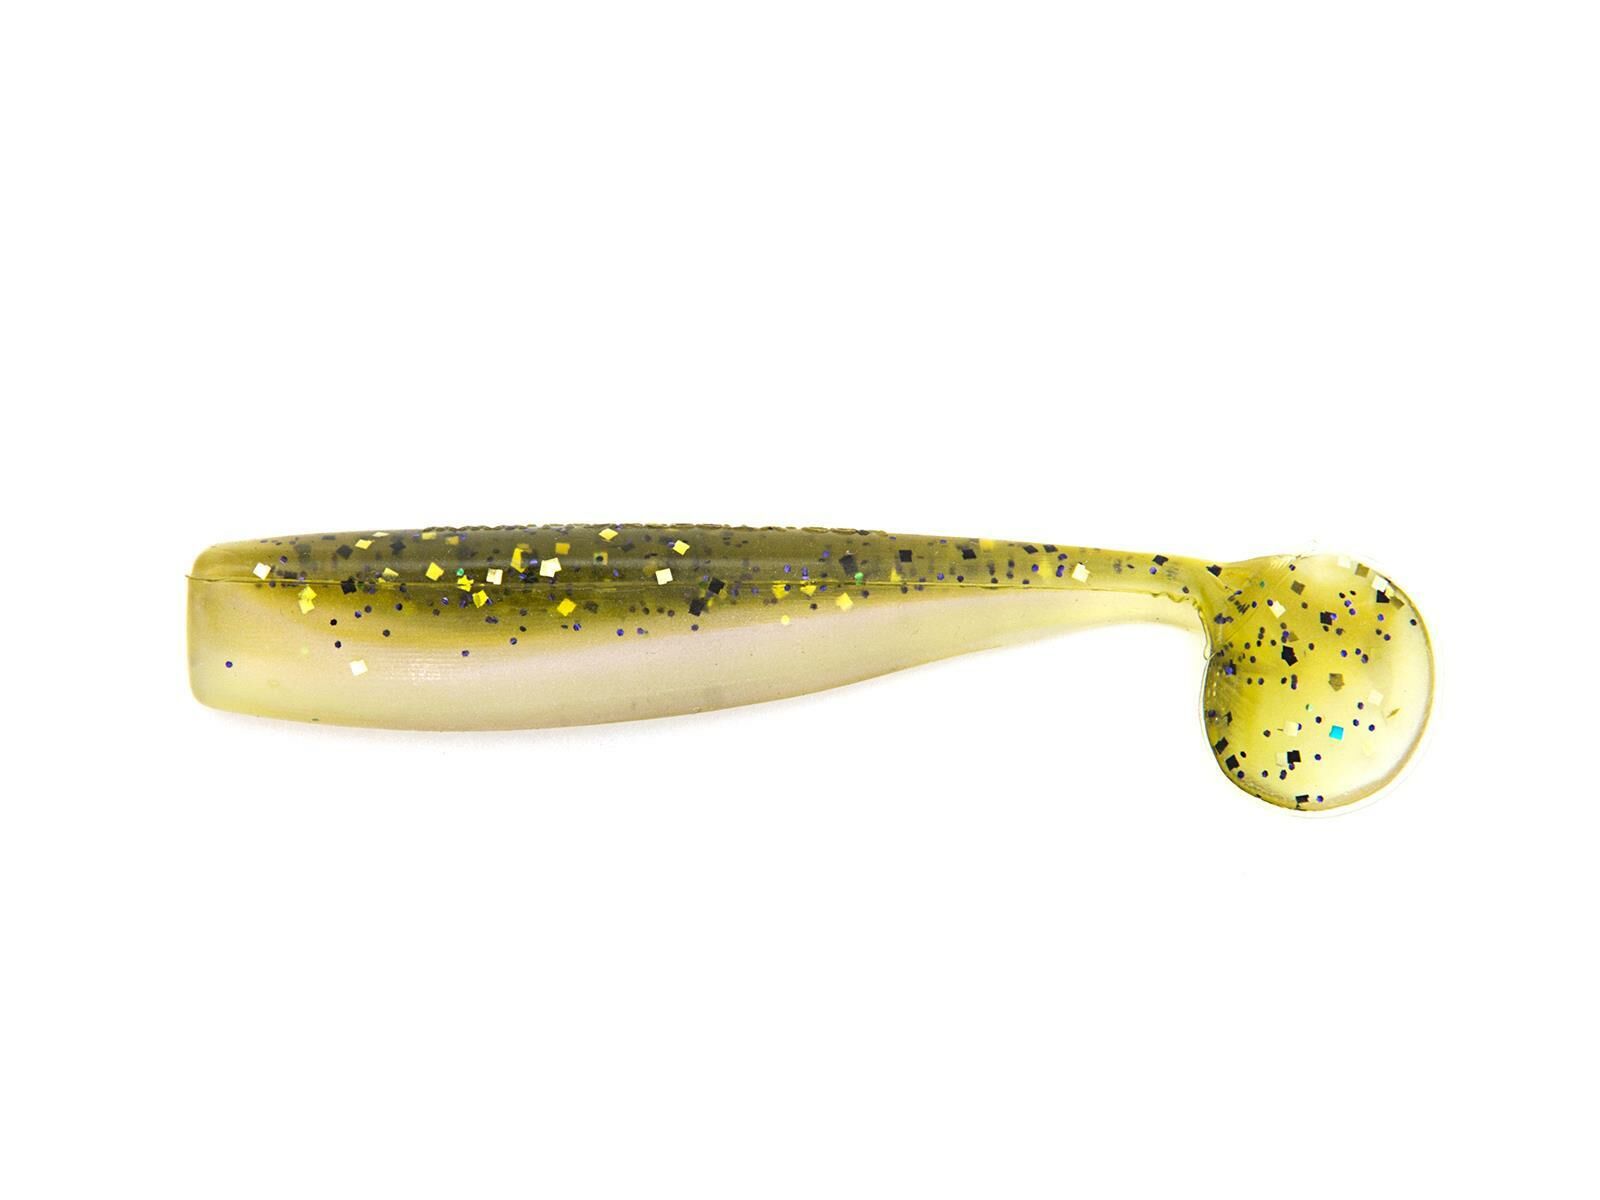 3.75" Shaker - Goby